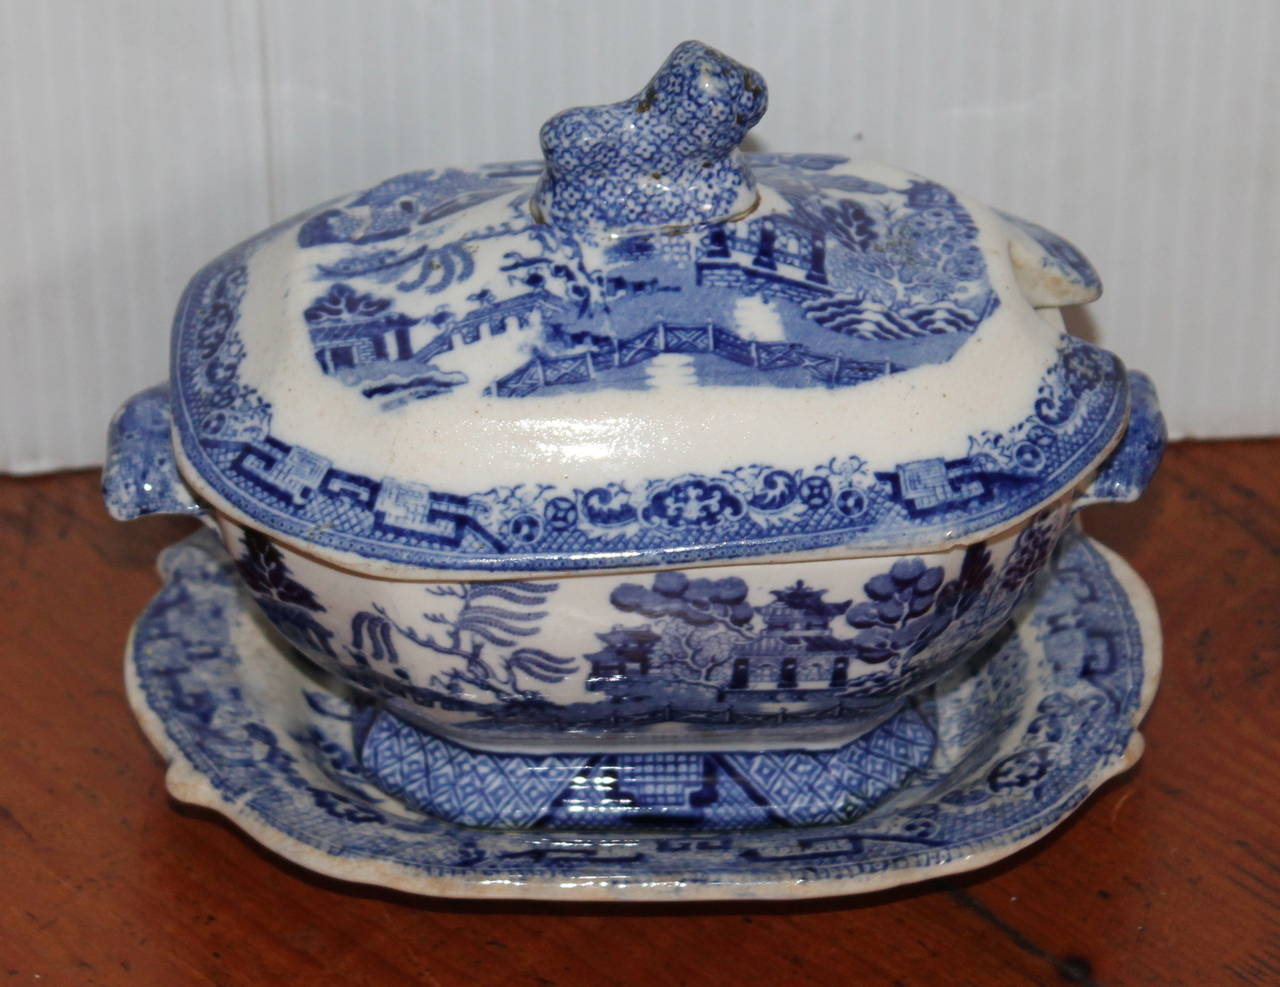 Three-piece set of early 19th century English blue willow diminutive tureen set. This early ironstone three-piece set is in mint condition and quite rare. The lamb finial is on the top of the lid. Condition is very good.